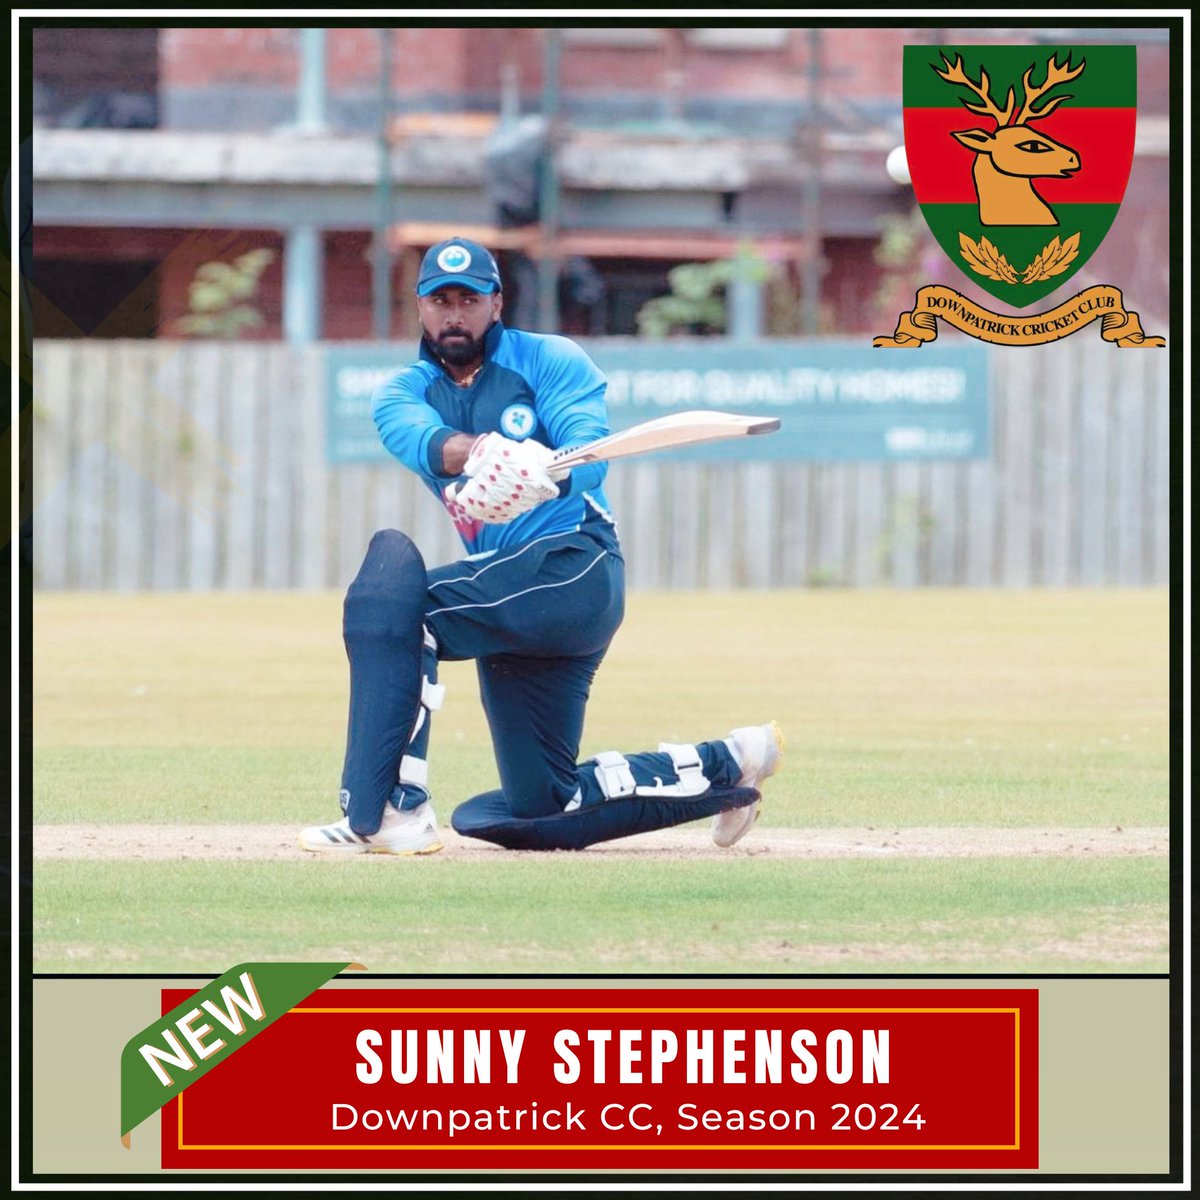 🚨 𝐍𝐞𝐰 𝐒𝐢𝐠𝐧𝐢𝐧𝐠 𝐀𝐥𝐞𝐫𝐭 🚨 Downpatrick Cricket Club are delighted to announce the signing of 𝗦𝘂𝗻𝗻𝘆 𝗦𝘁𝗲𝗽𝗵𝗲𝗻𝘀𝗼𝗻 Sunny joins as a very valuable addition to our Senior League playing squad #downpatrickcricketclub #NCU #downpatrickcricketclub2024